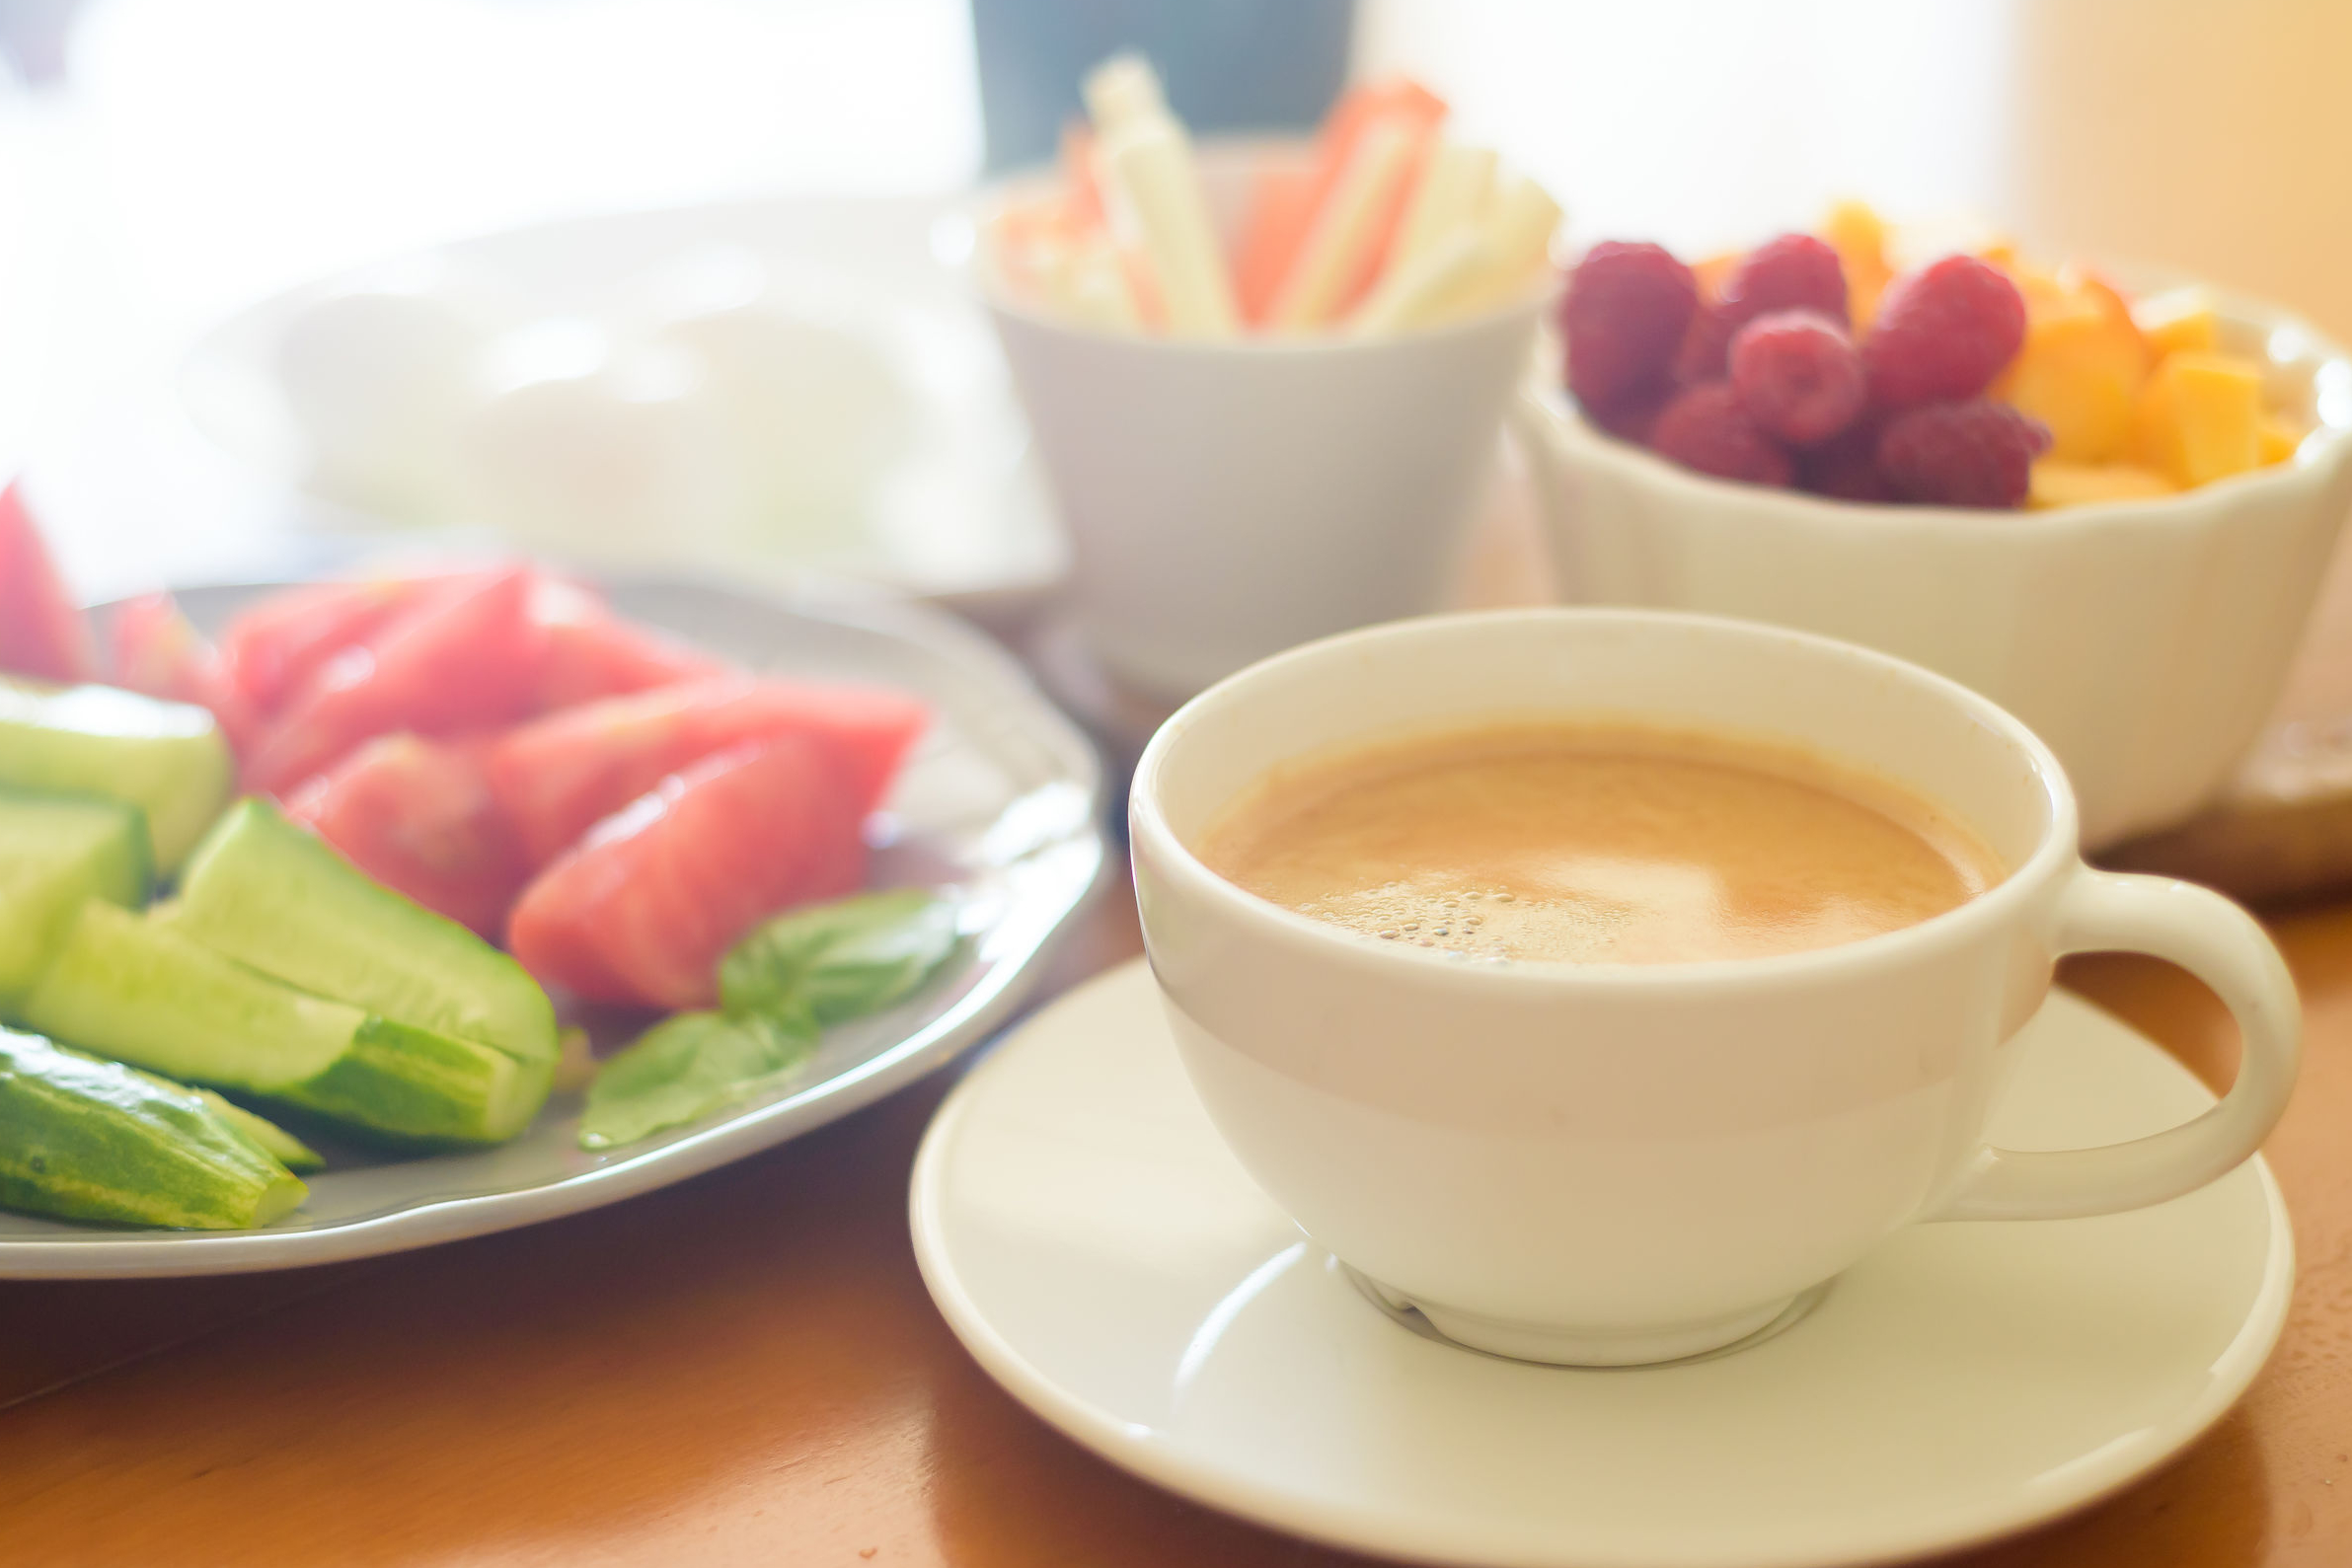 Breakfast with coffee, vegetables and fruits